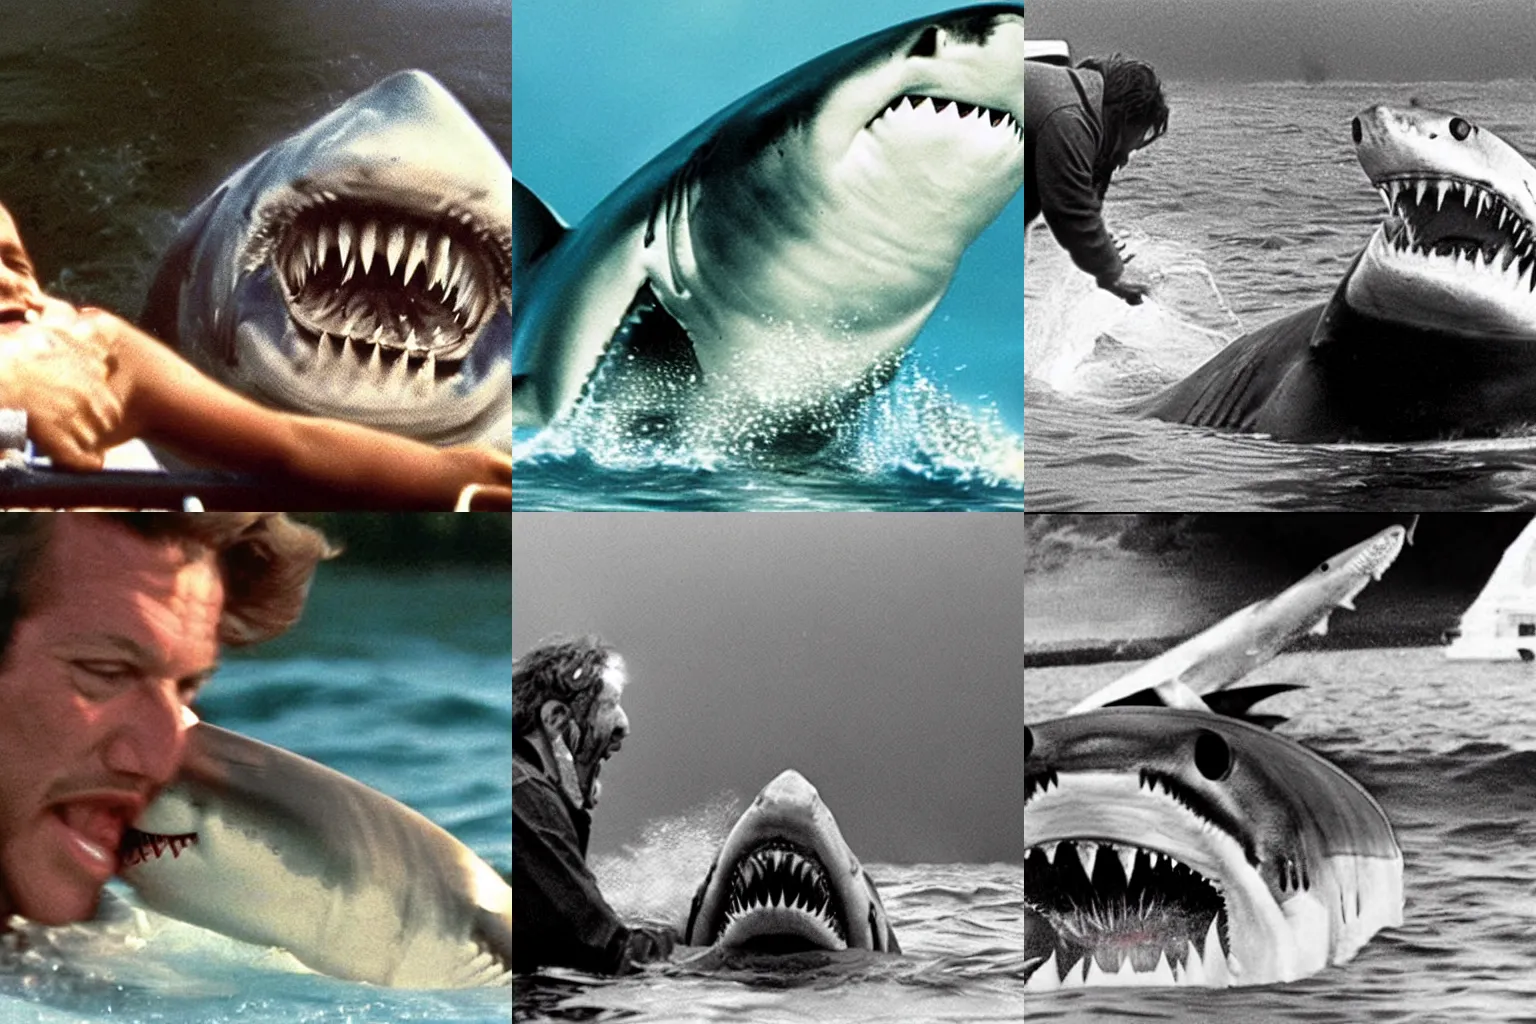 Prompt: deleted scene from Jaws with closeup of Shark eating a dog